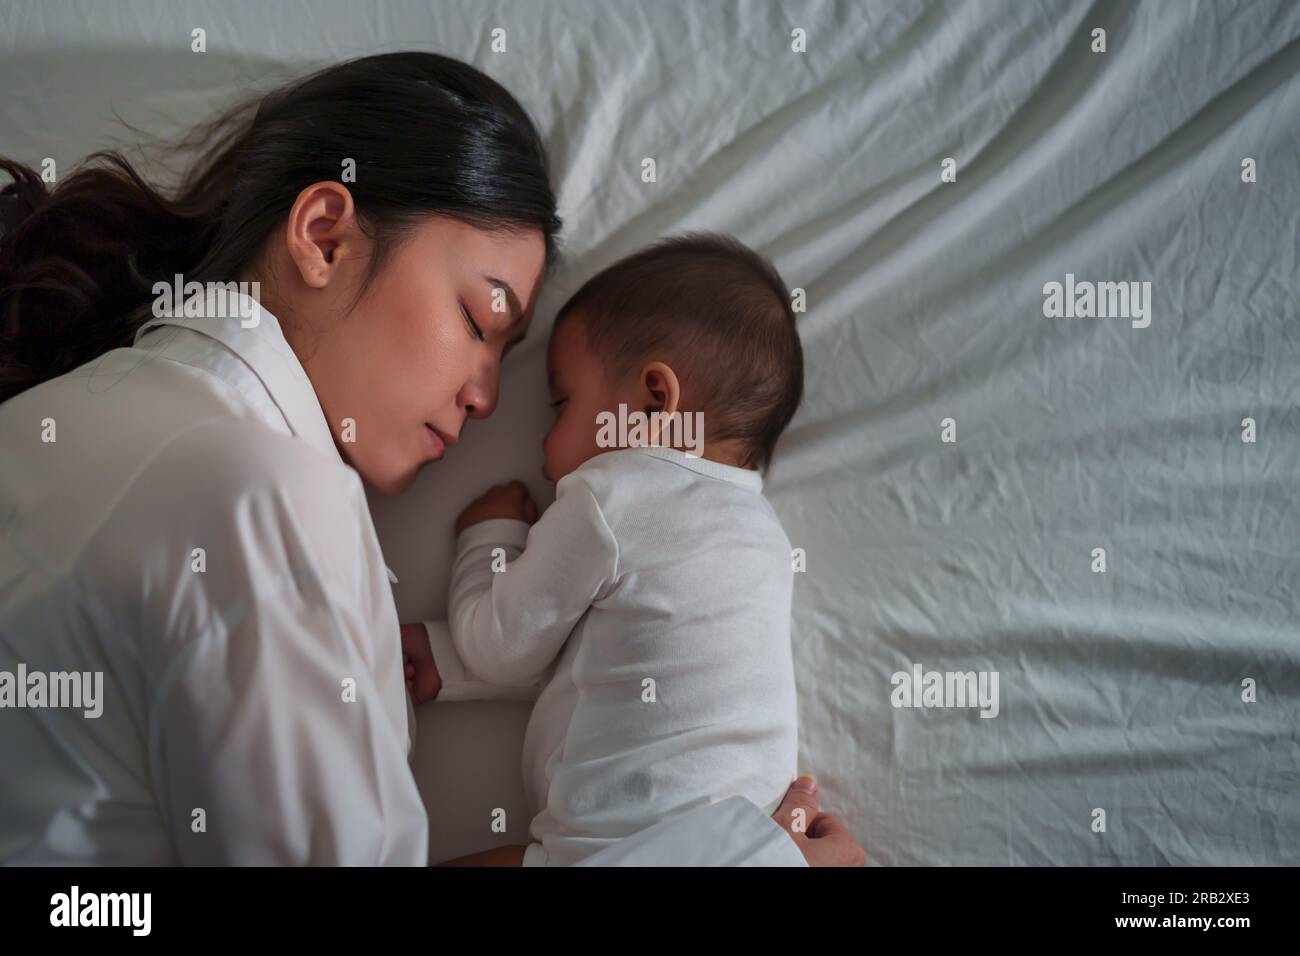 mother embraces the infant baby sleeping together in a bed at night Stock Photo